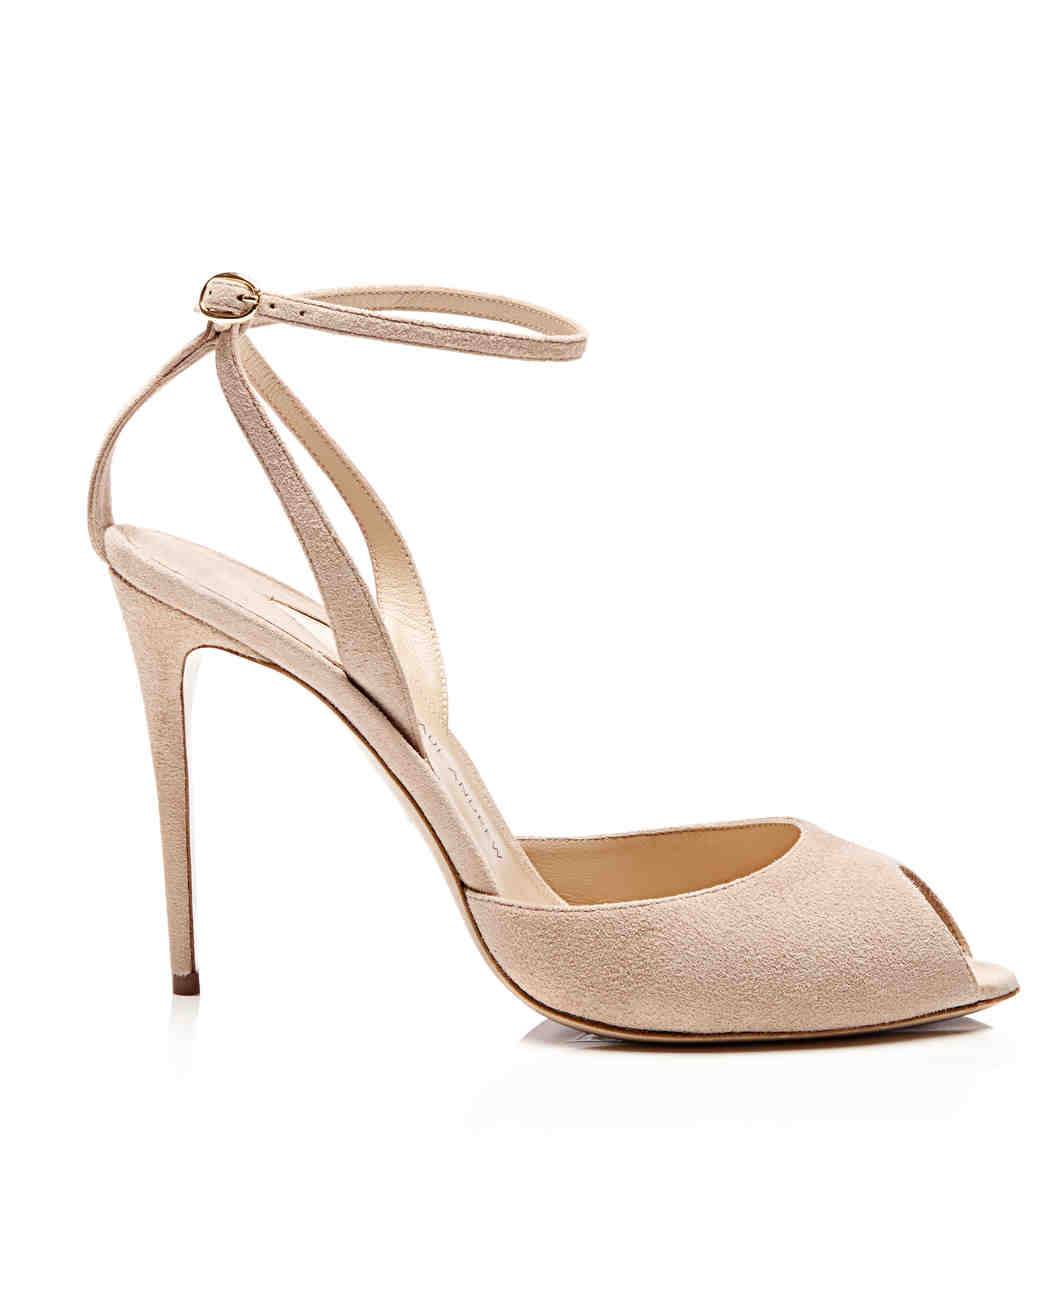 36 Best Shoes for a Bride to Wear to a Fall Wedding | Martha Stewart ...